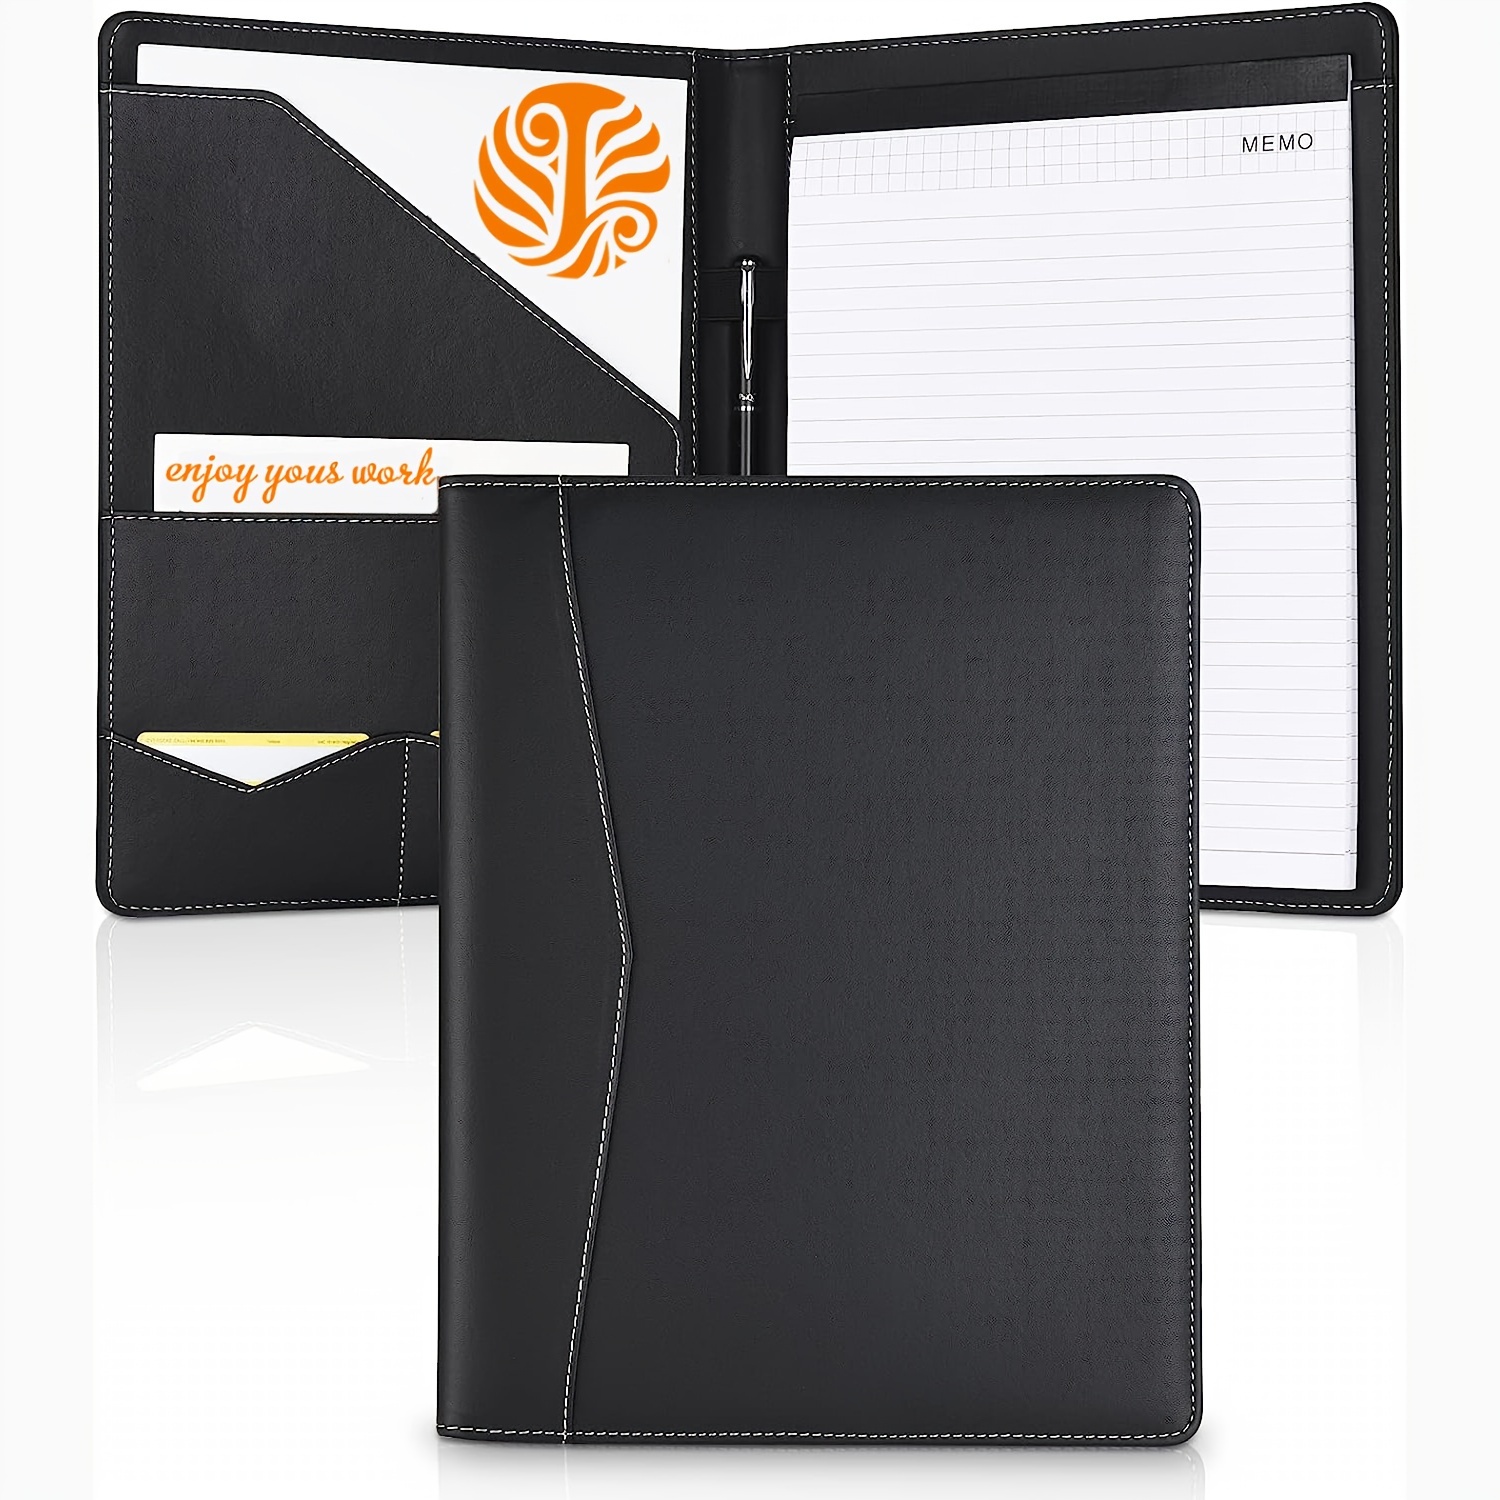 A6 Zippered Business Portfolio Notebook with Calculator, 6 Ring Closure  Paper Padfolio Office Conference Classroom School Writing Pad Organizer  Card